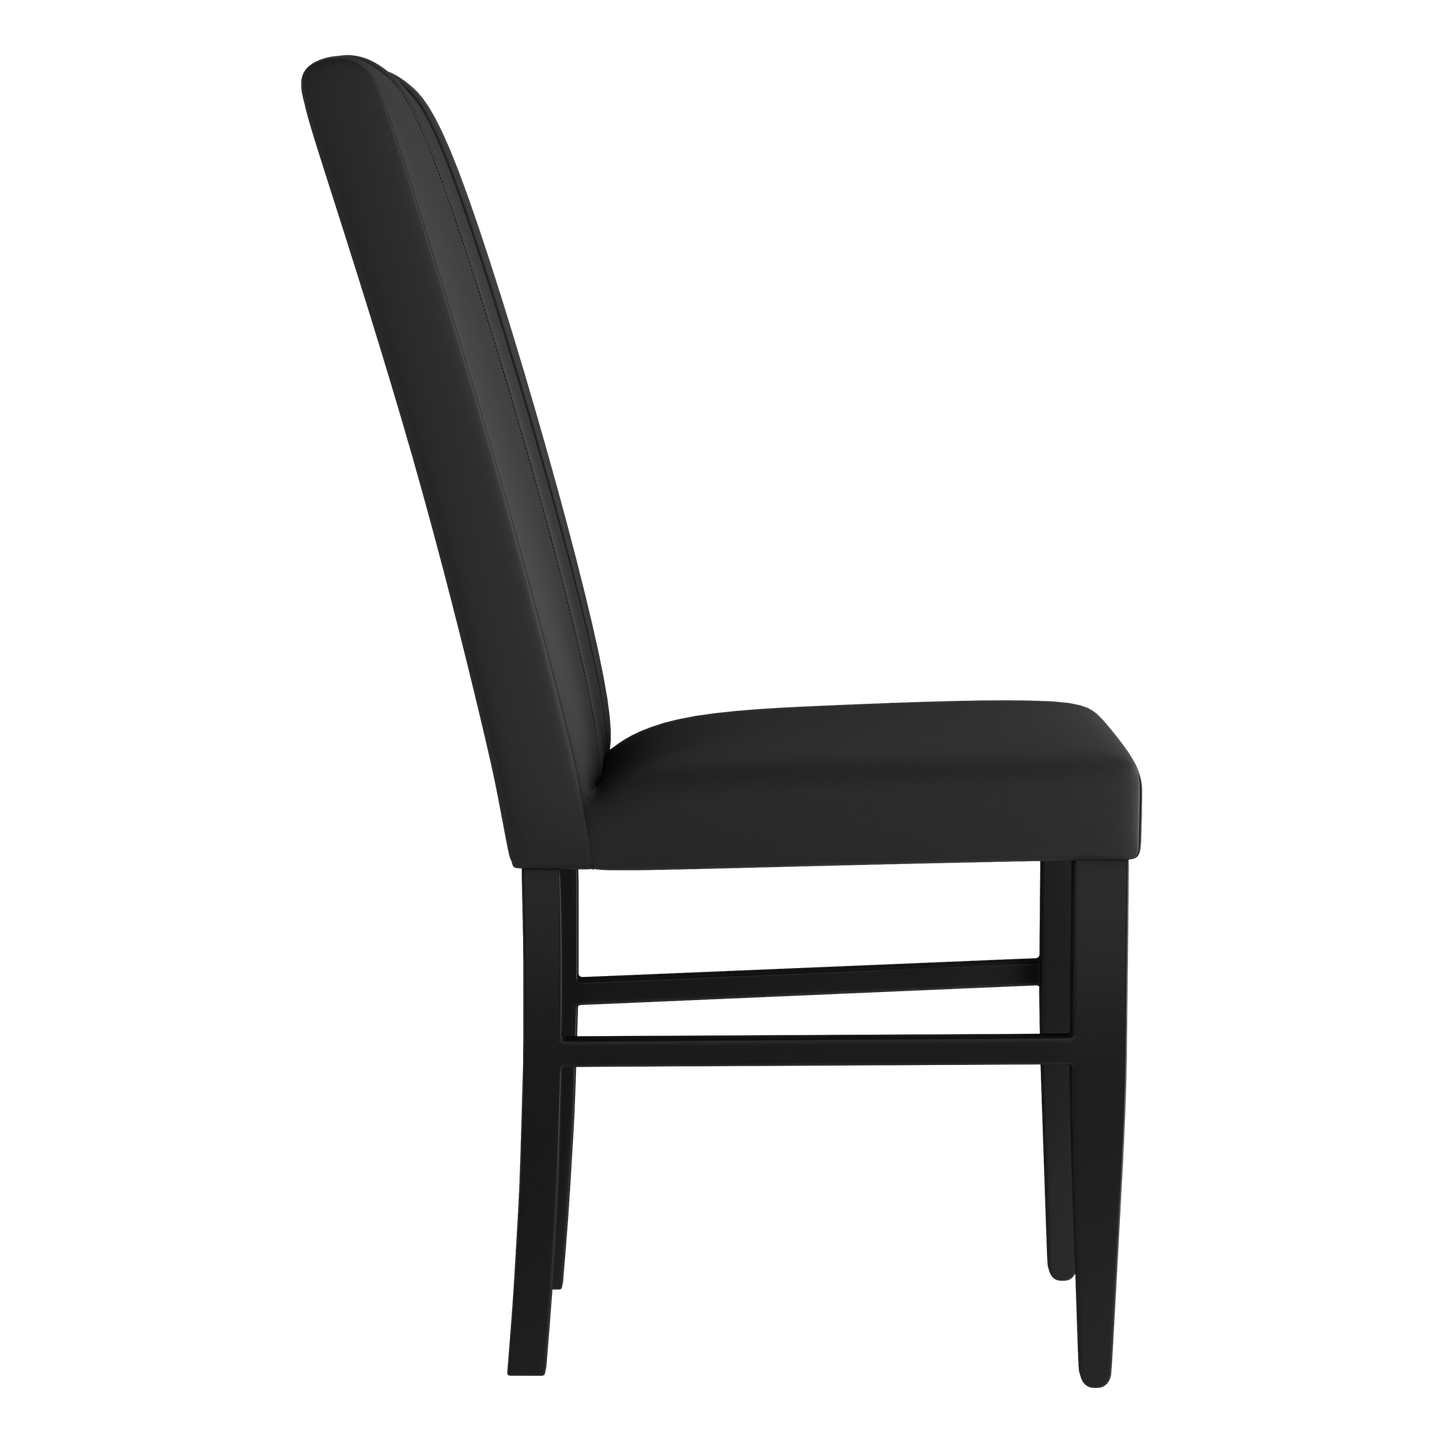 Side Chair 2000 with Mississippi State Alternate Set of 2